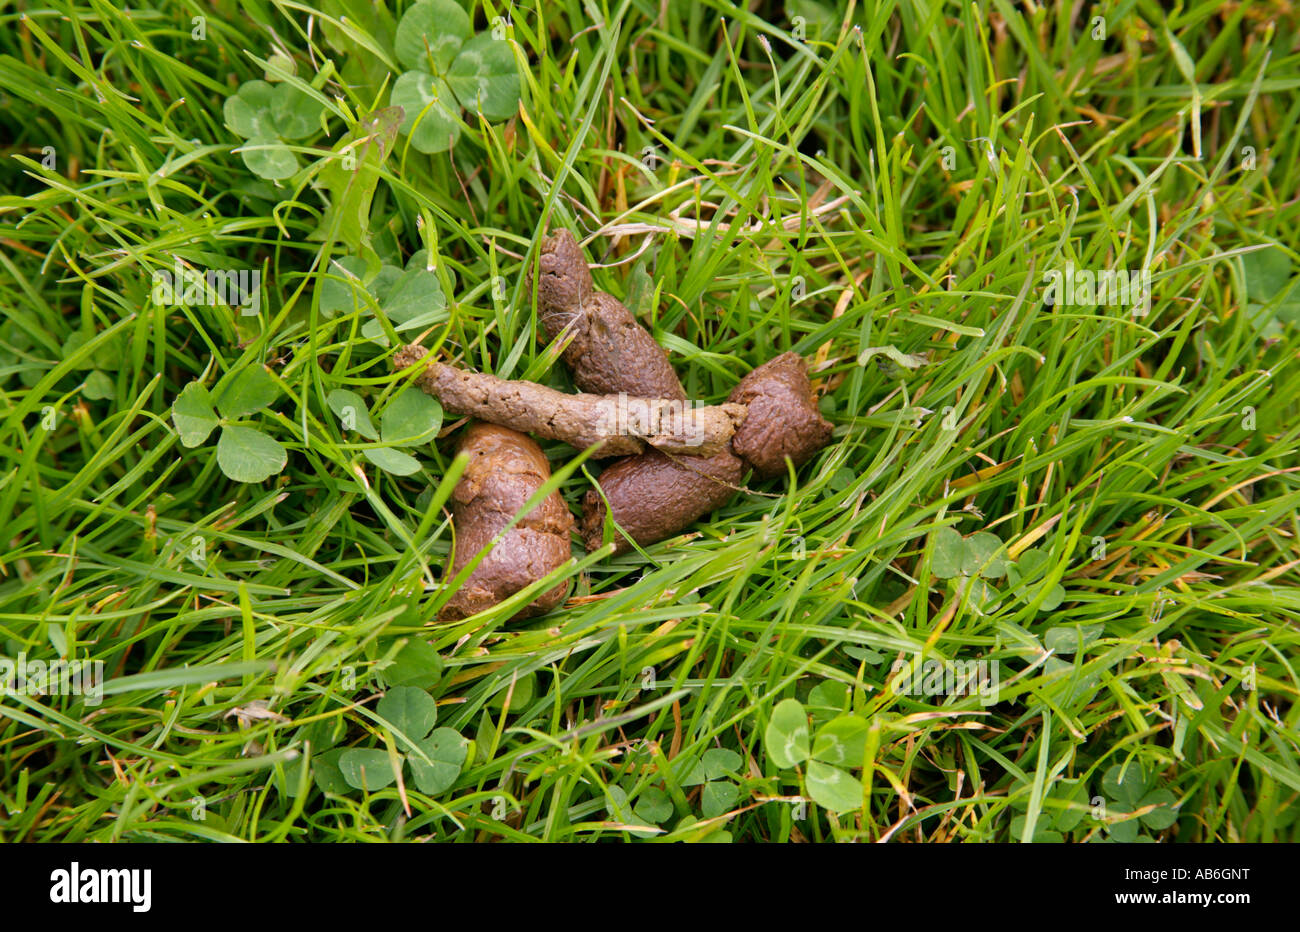 Dog excrement left in grass Stock Photo